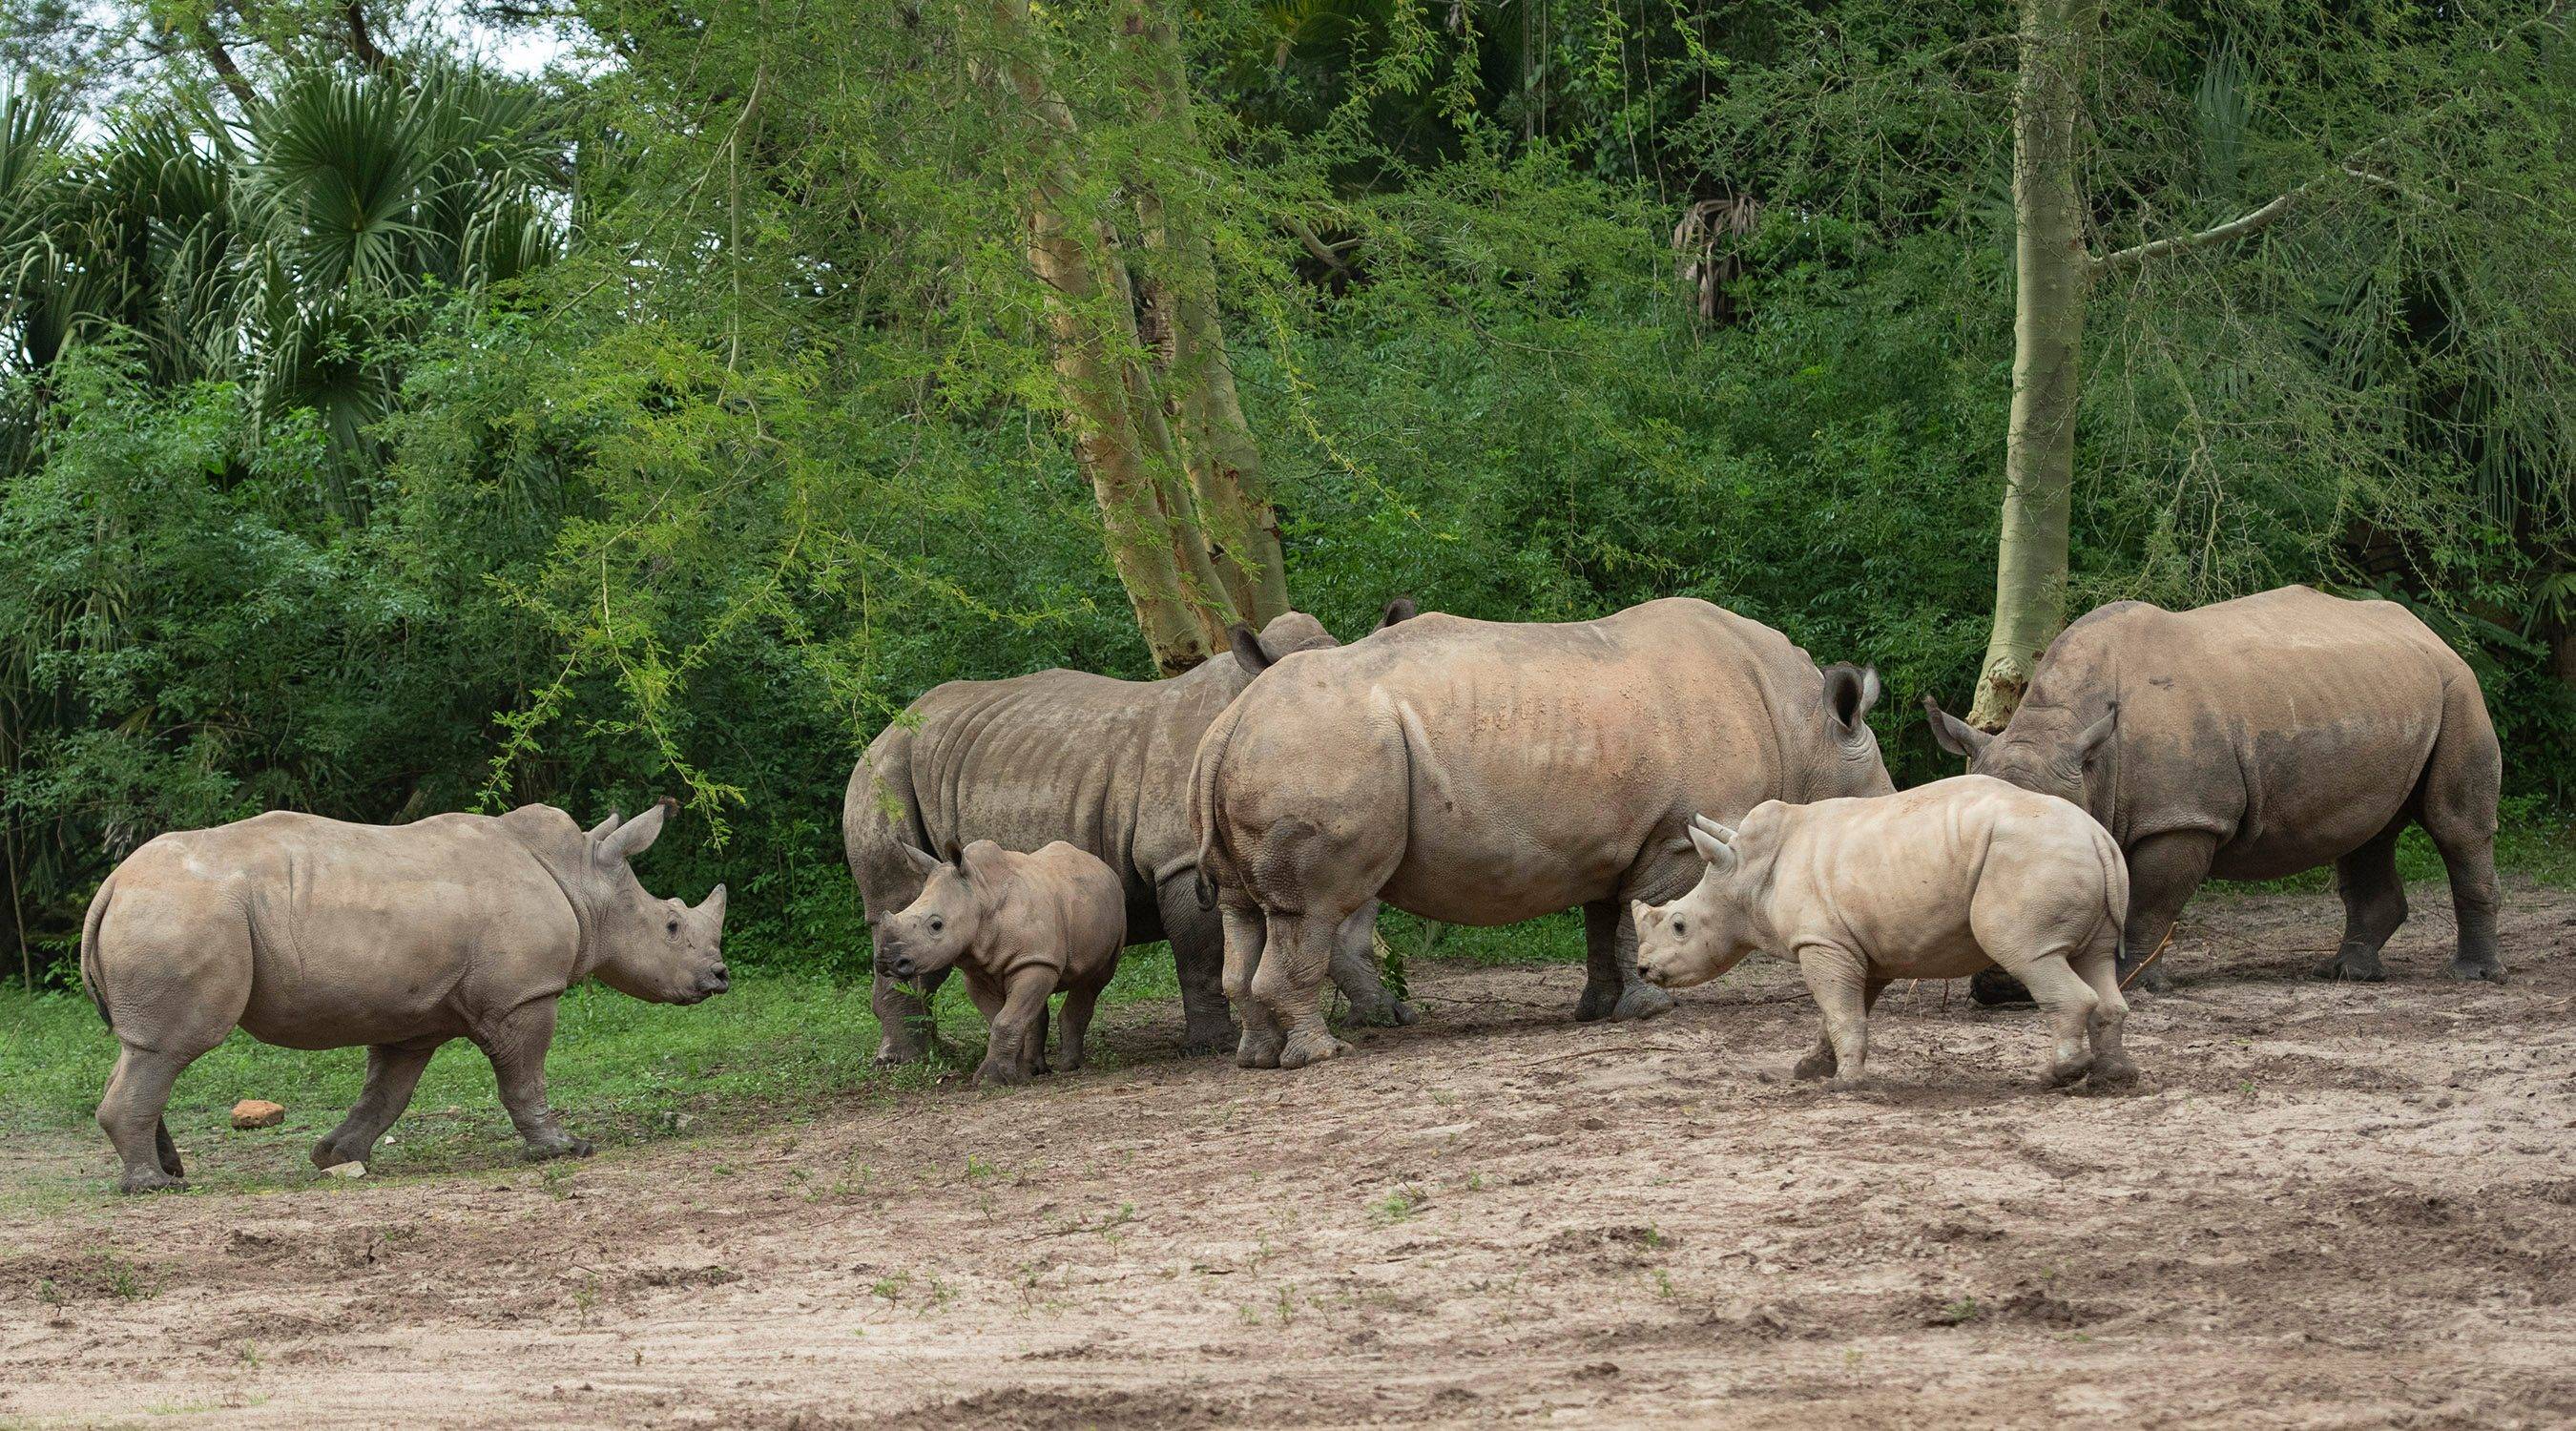 Four-month-old white rhino calf Logan (center) joins her two older half-brothers, Ranger (left) and Mylo (front right), on the Kilimanjaro Safaris savanna